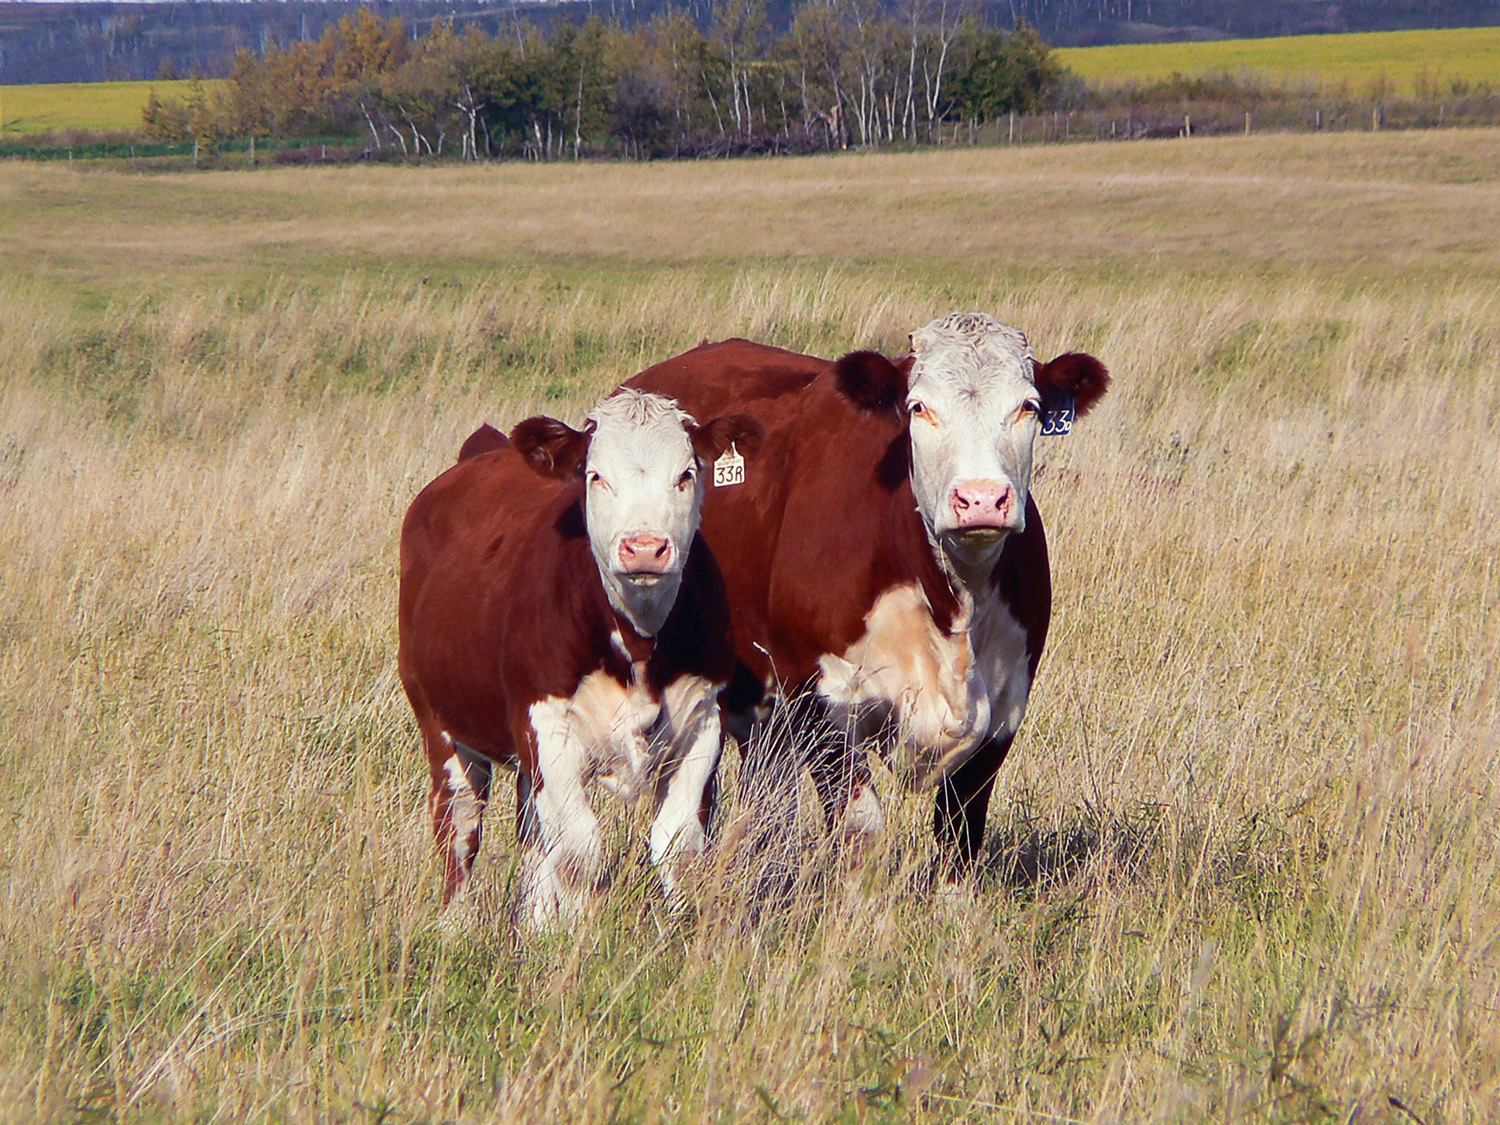 Two cattle standing in a field filled with tall grass.